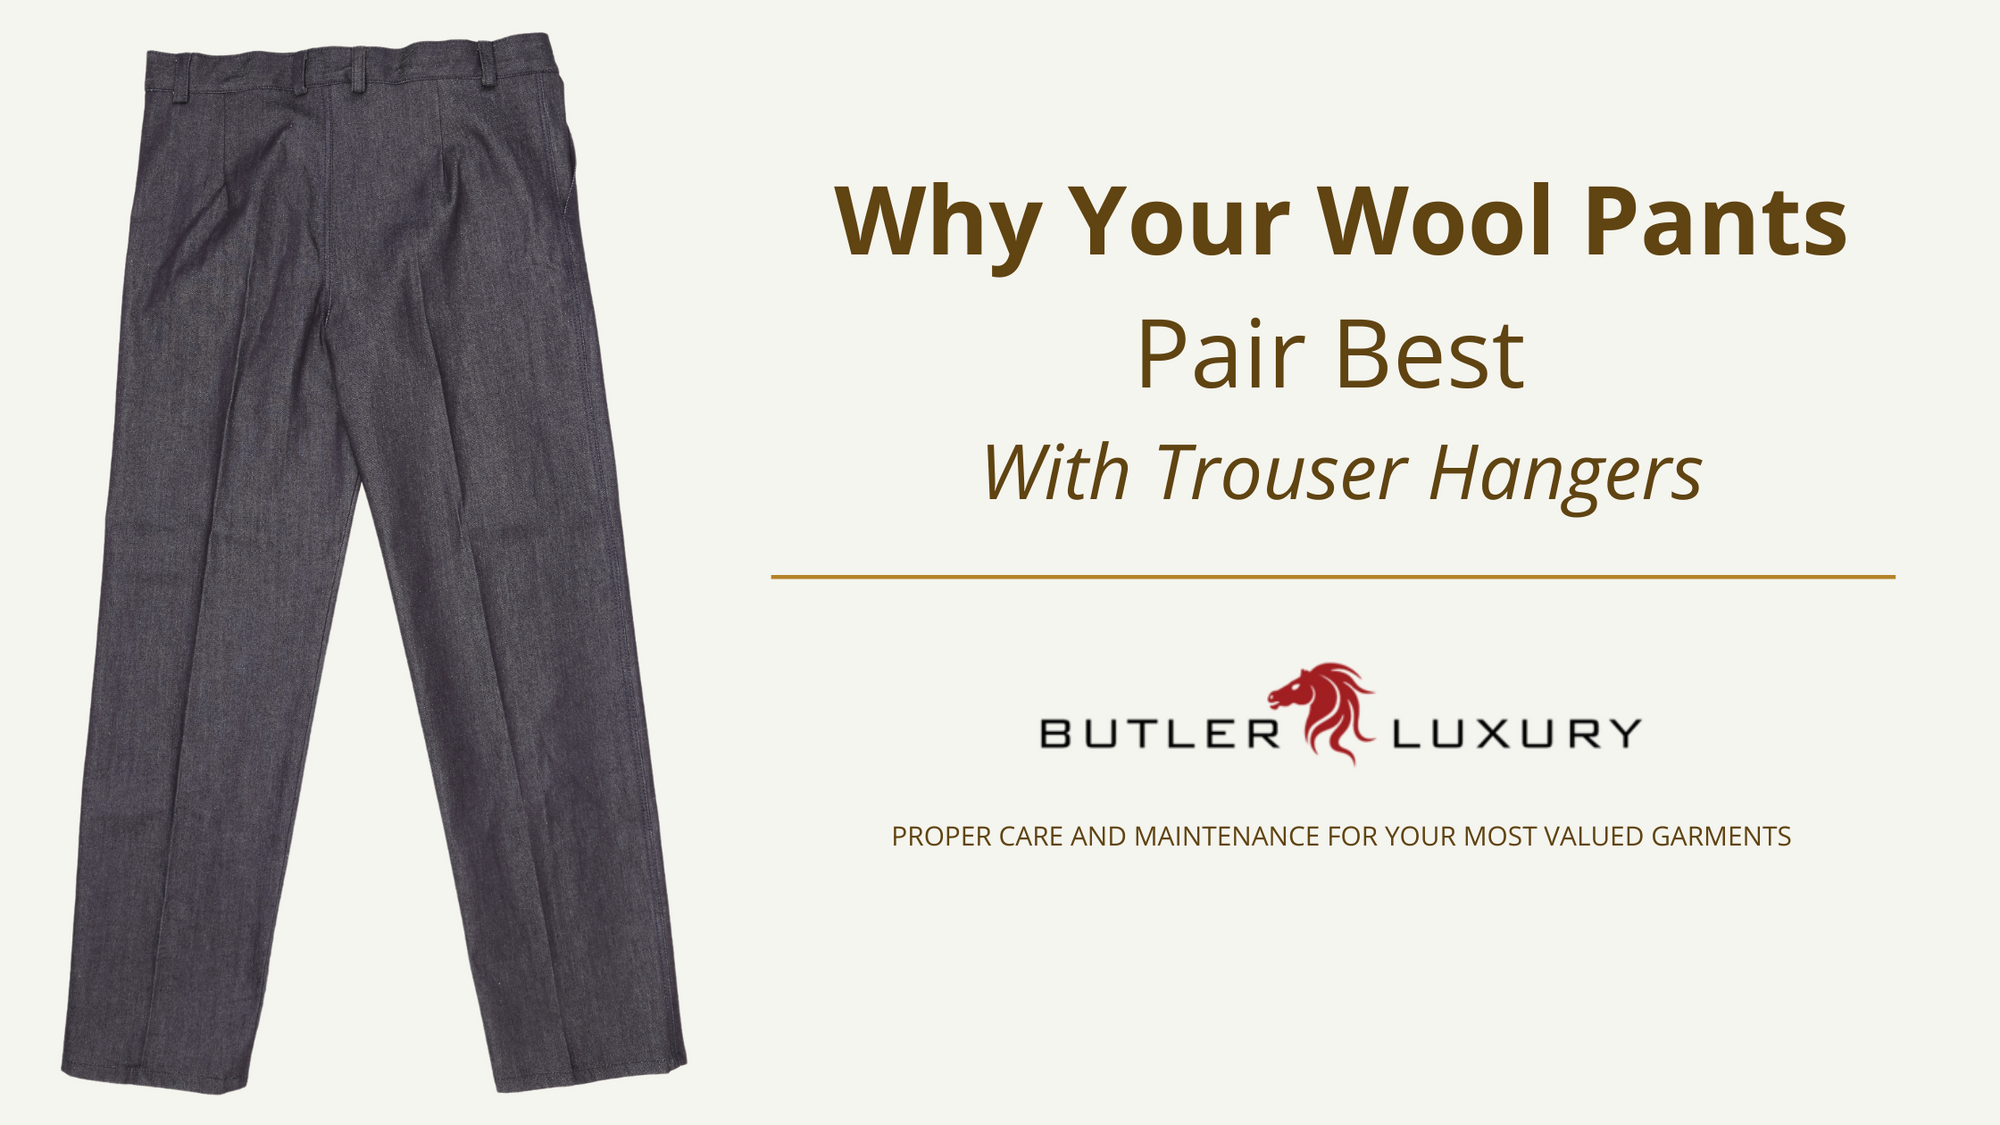 Why Your Wool Pants Pair Best With Trouser Hangers